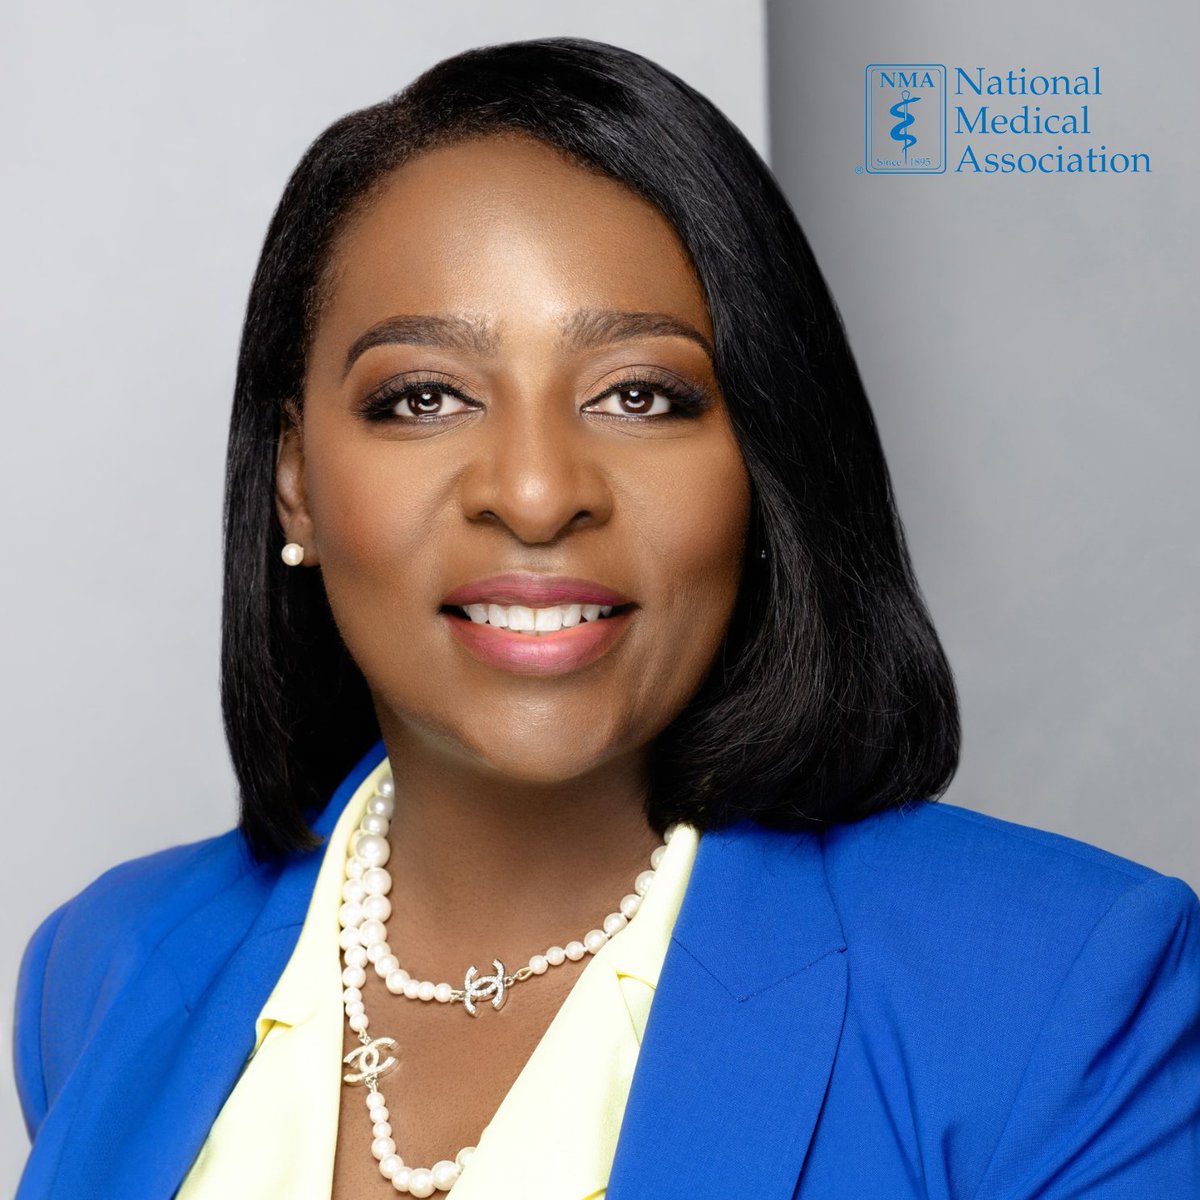 📢 Dr. Yolanda Lawson, recently emphasized the impact of racial representation in healthcare during a U.S. Senate hearing, highlighting critical health disparities. Click here to read more: bityl.co/PnhW #HealthEquity #MaternalHealth #DiversityInMedicine #NMA